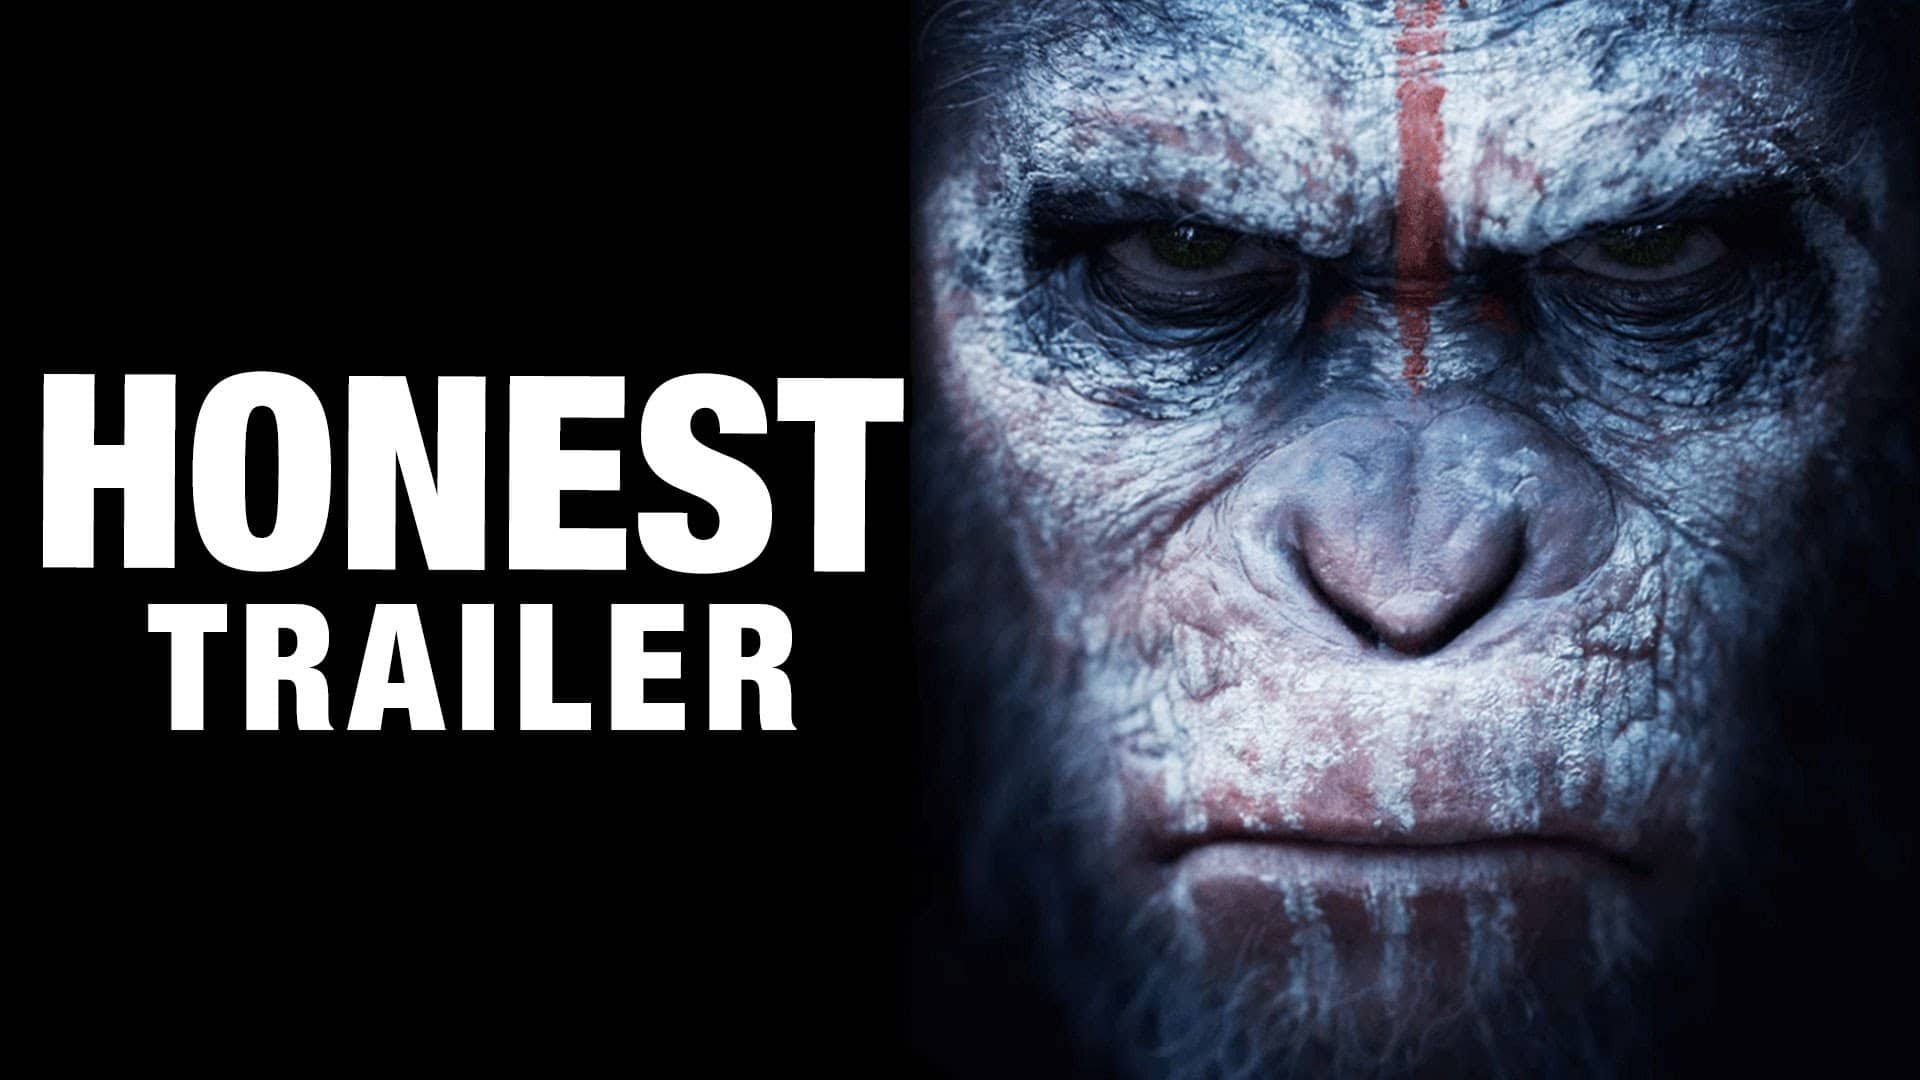 The Honest Trailer: Dawn of the Planet of the Apes